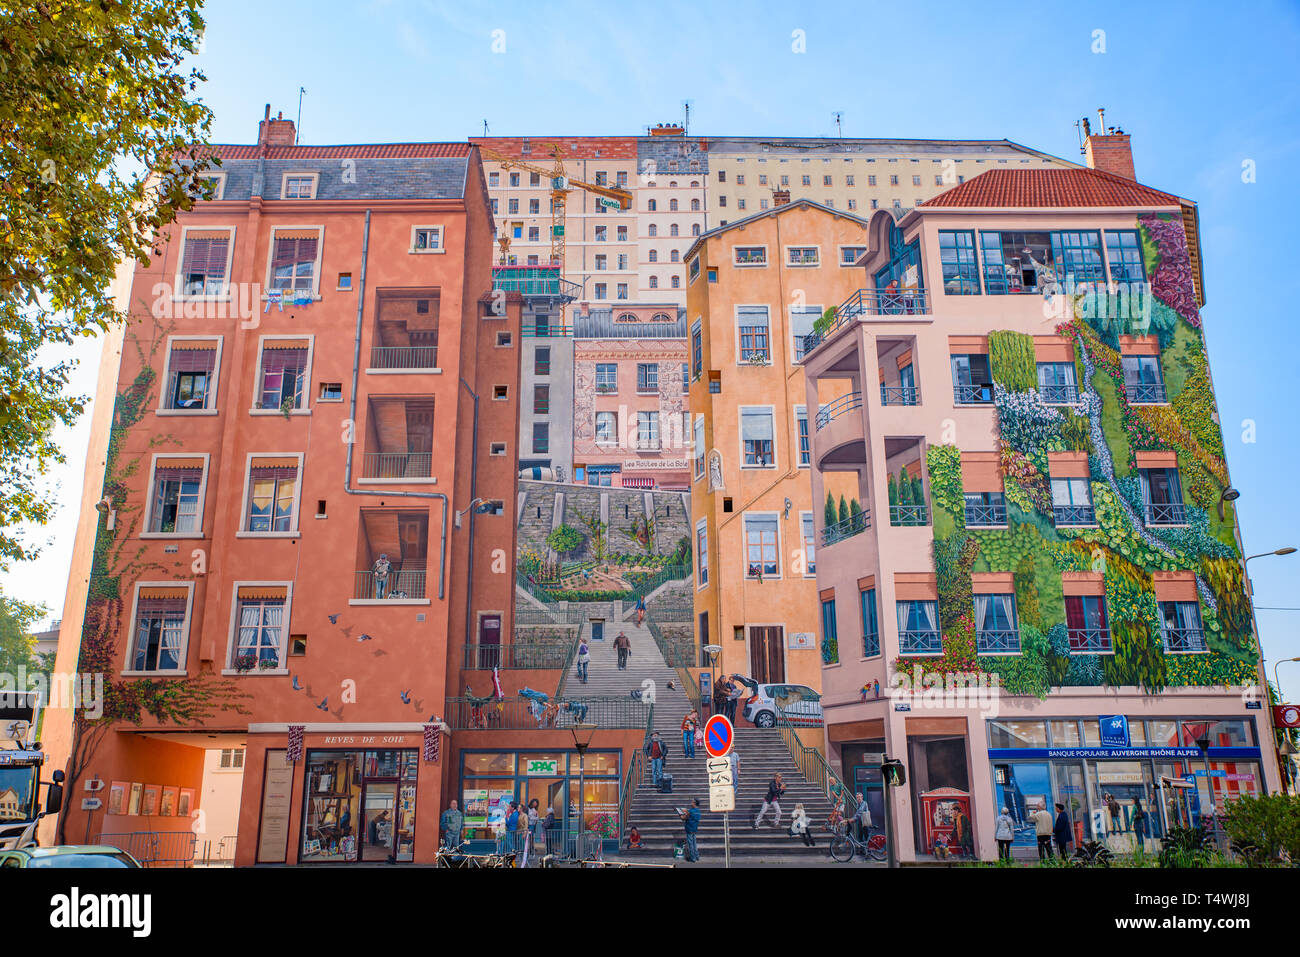 Mur des Canuts, the wall painting art in Lyon, France Stock Photo